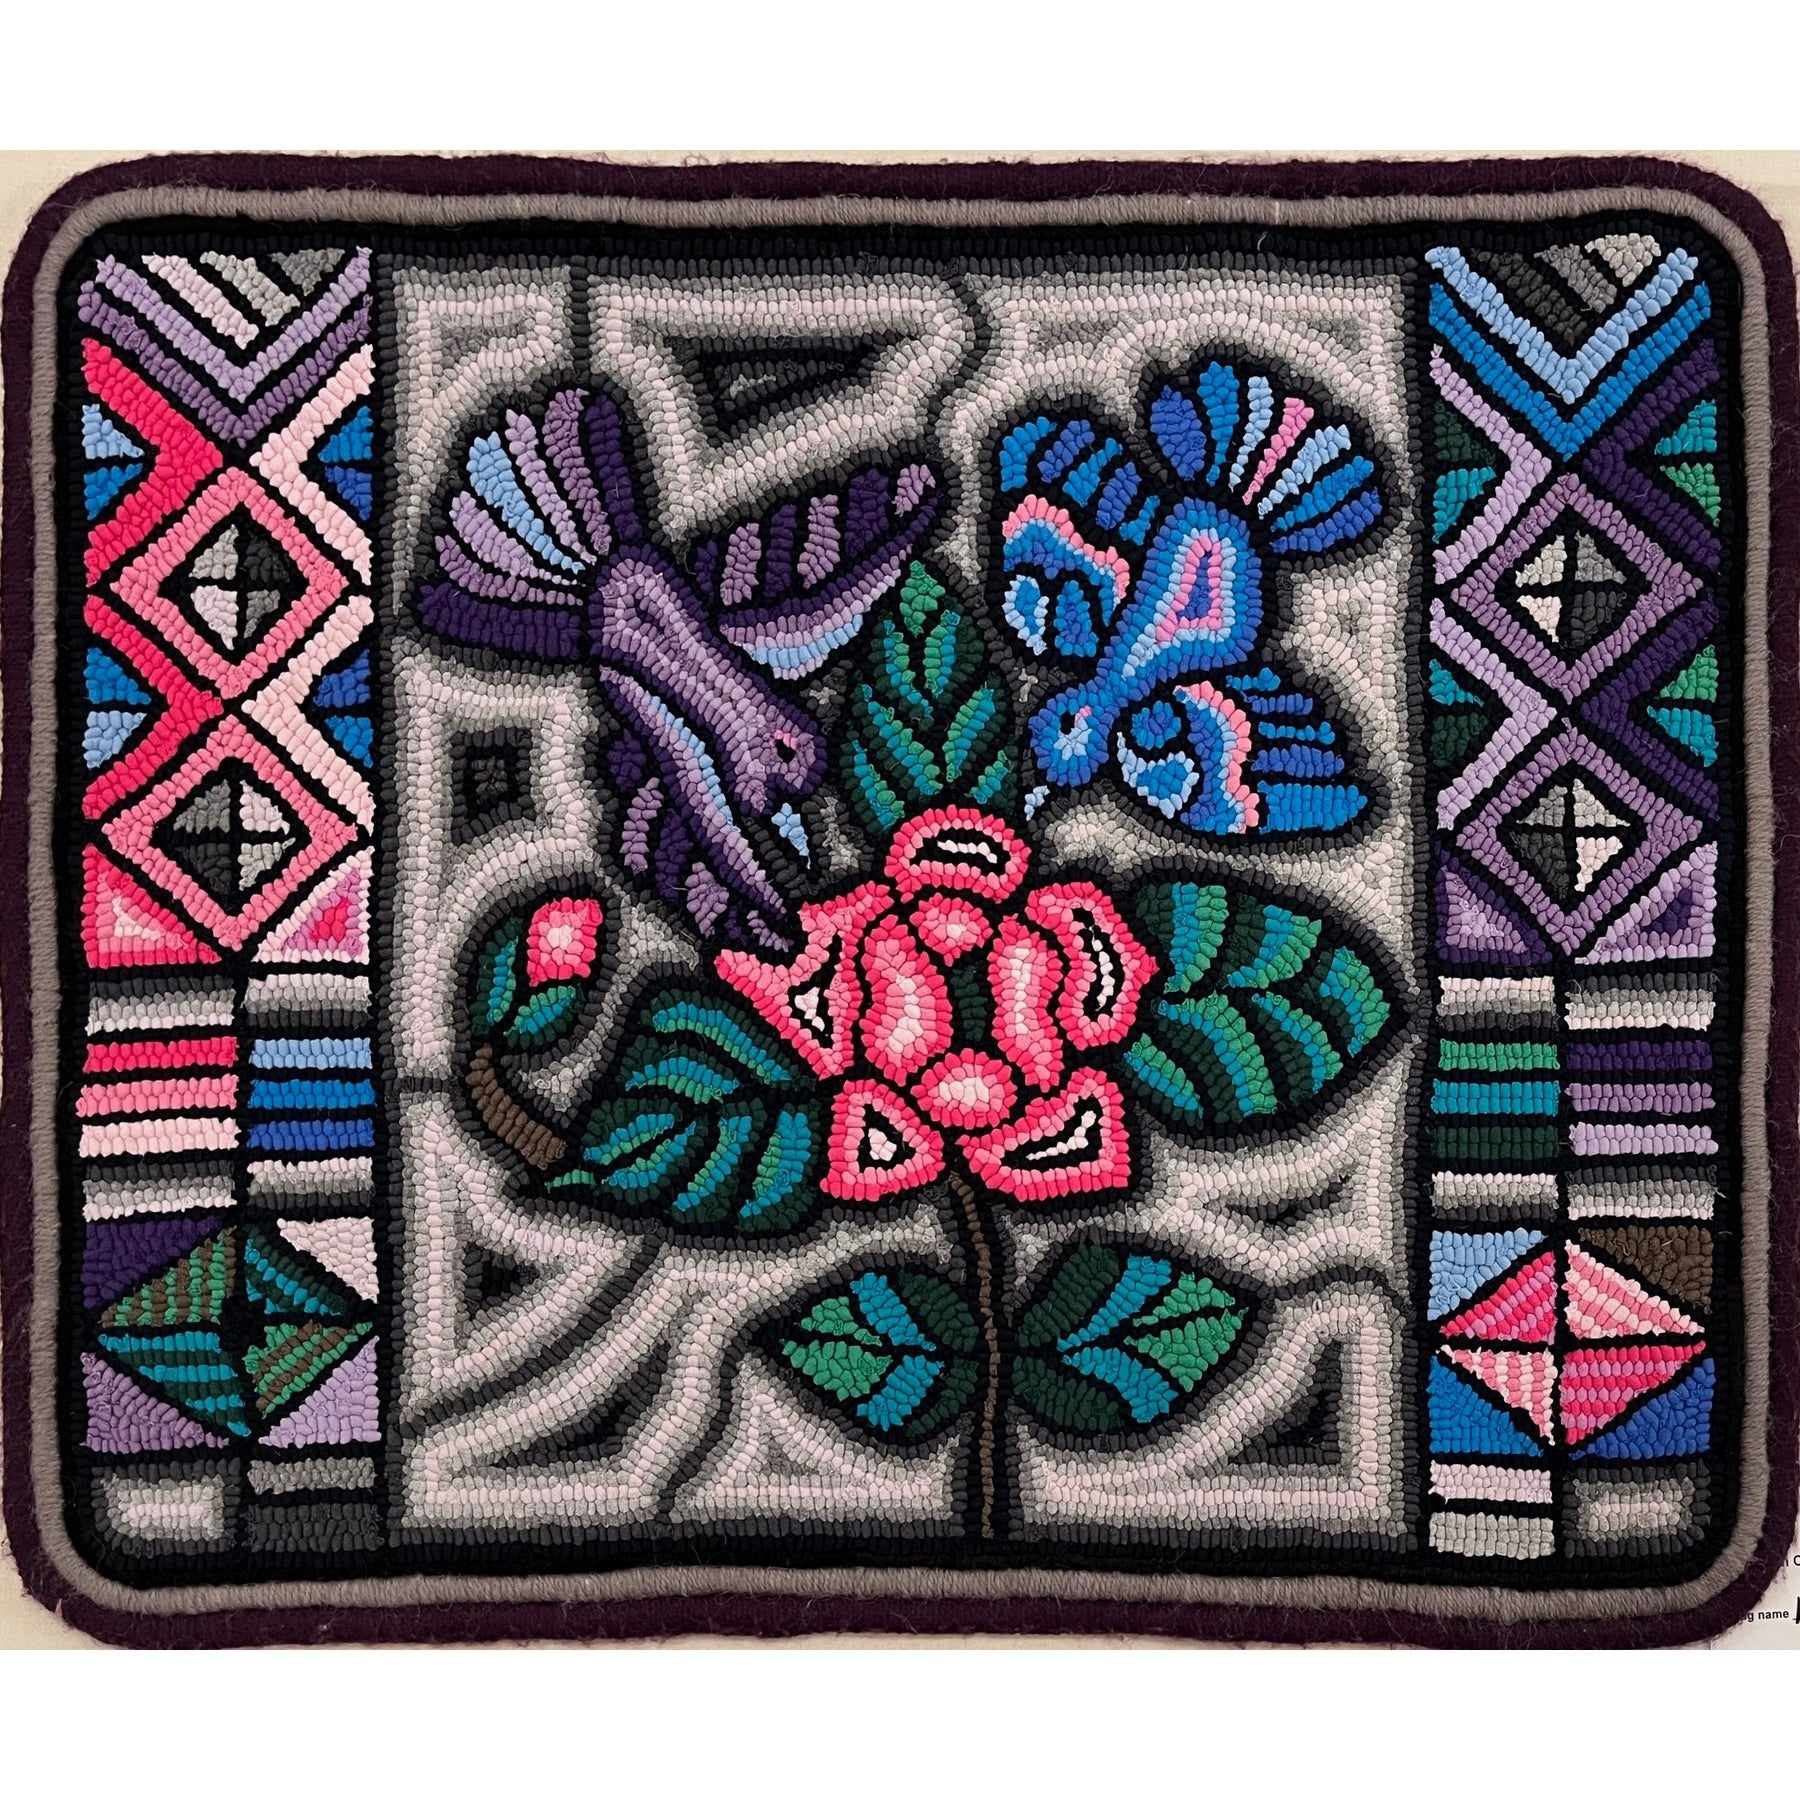 Multicolores Pattern #6, rug hooked by Patty Piek-Groth